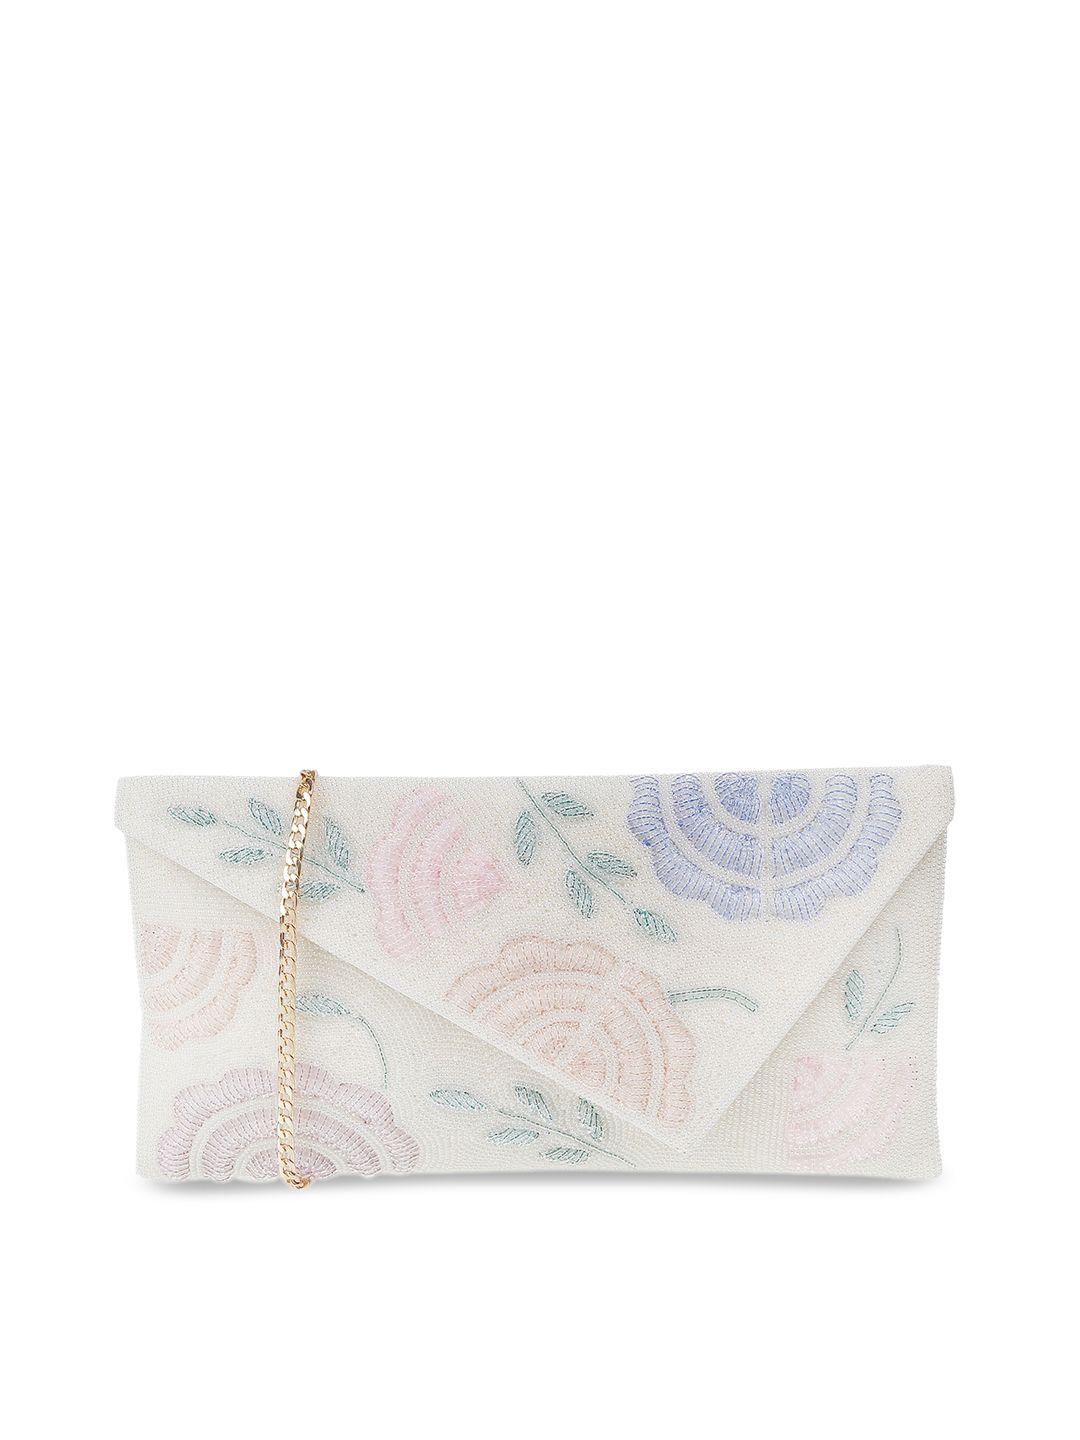 metro off white & green embroidered envelope clutch